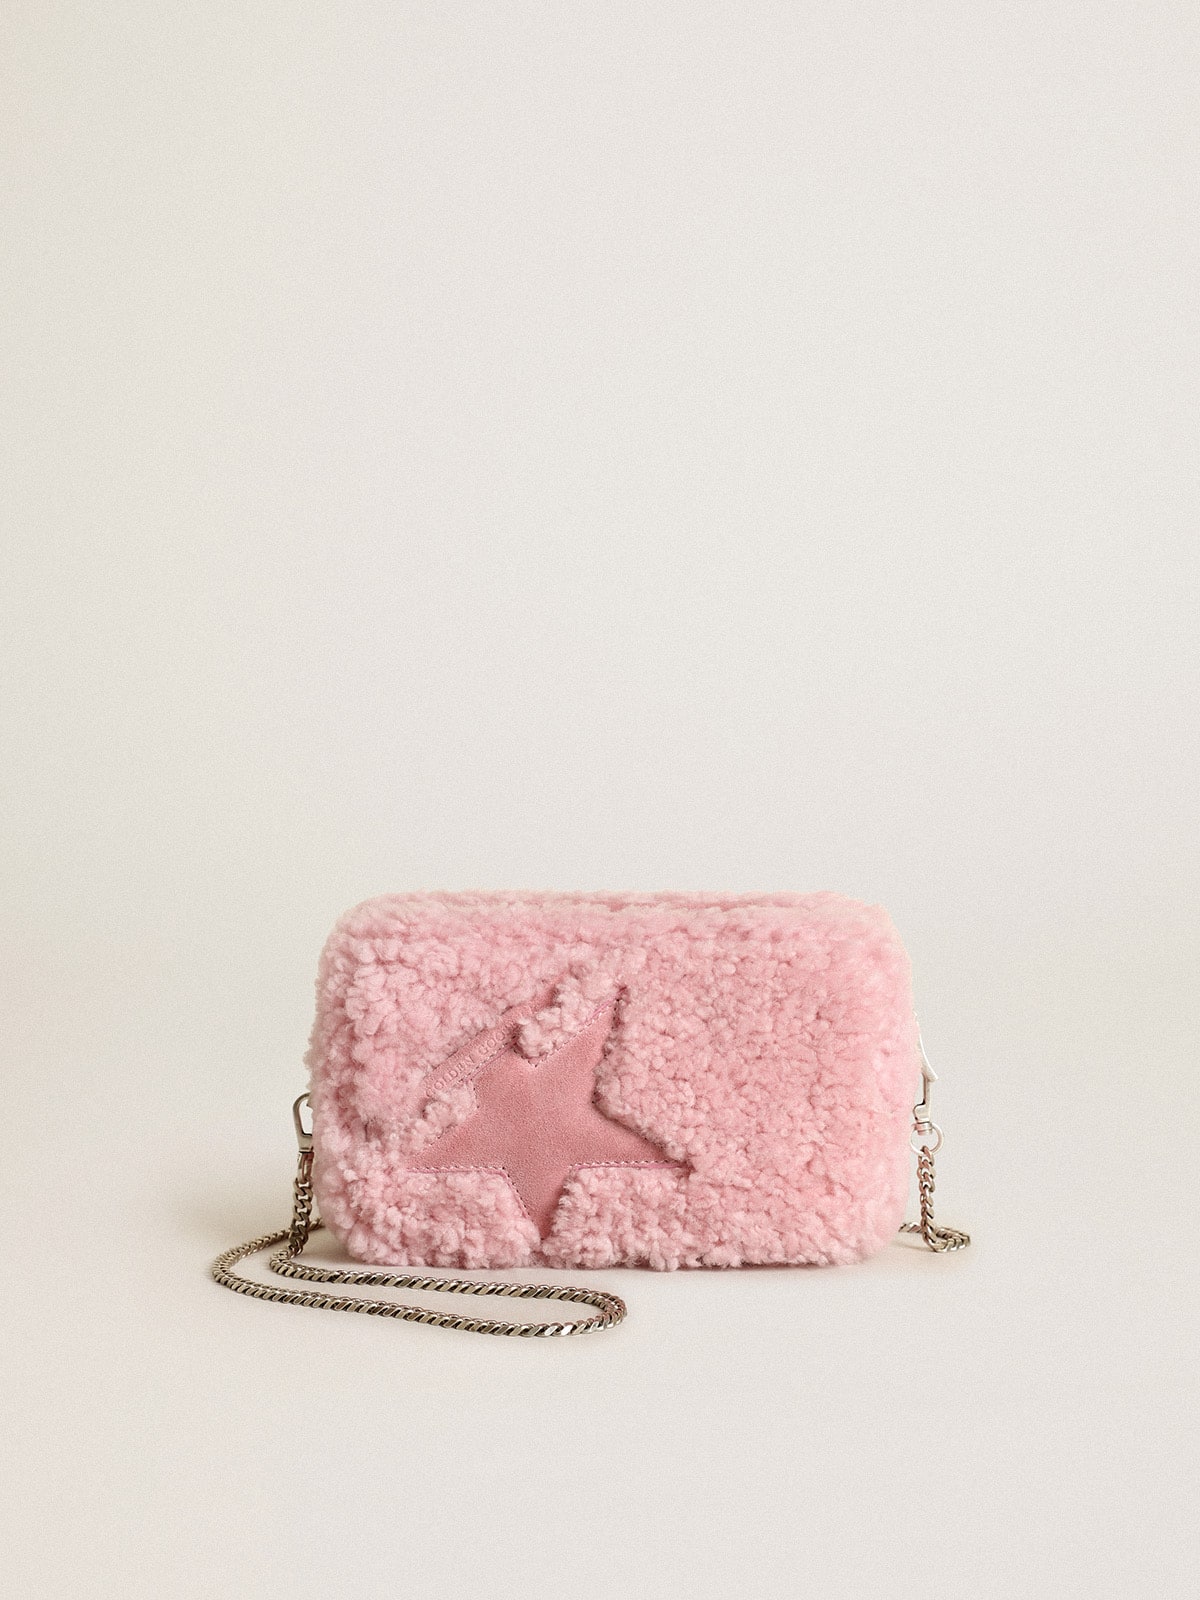 Golden Goose Mini Star Bag In Pink Shearling With Suede Star GBP450.0